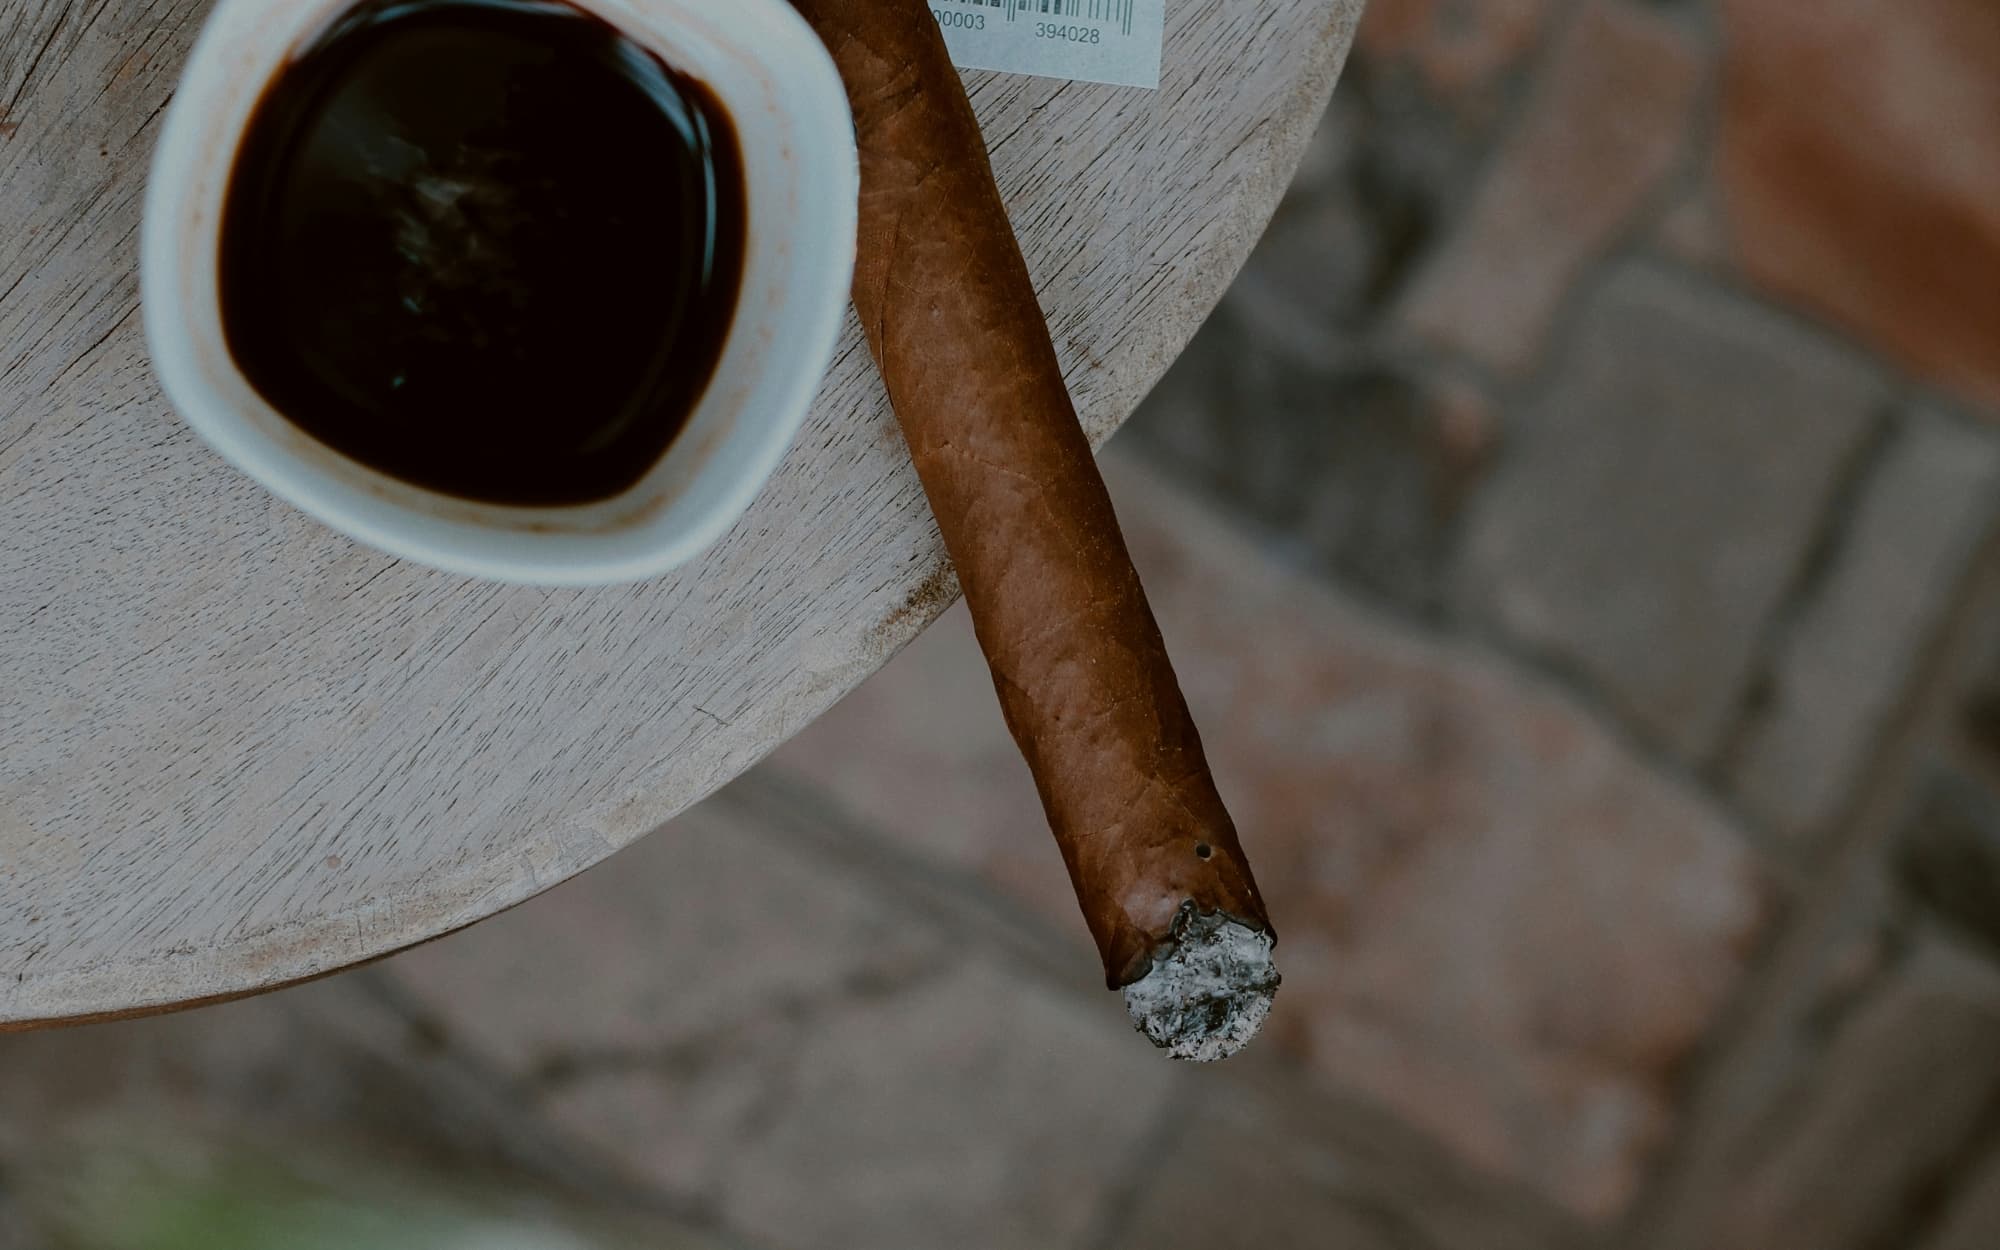 Partially smoked cigar shown sitting on a table, paired with a cup of black coffee.